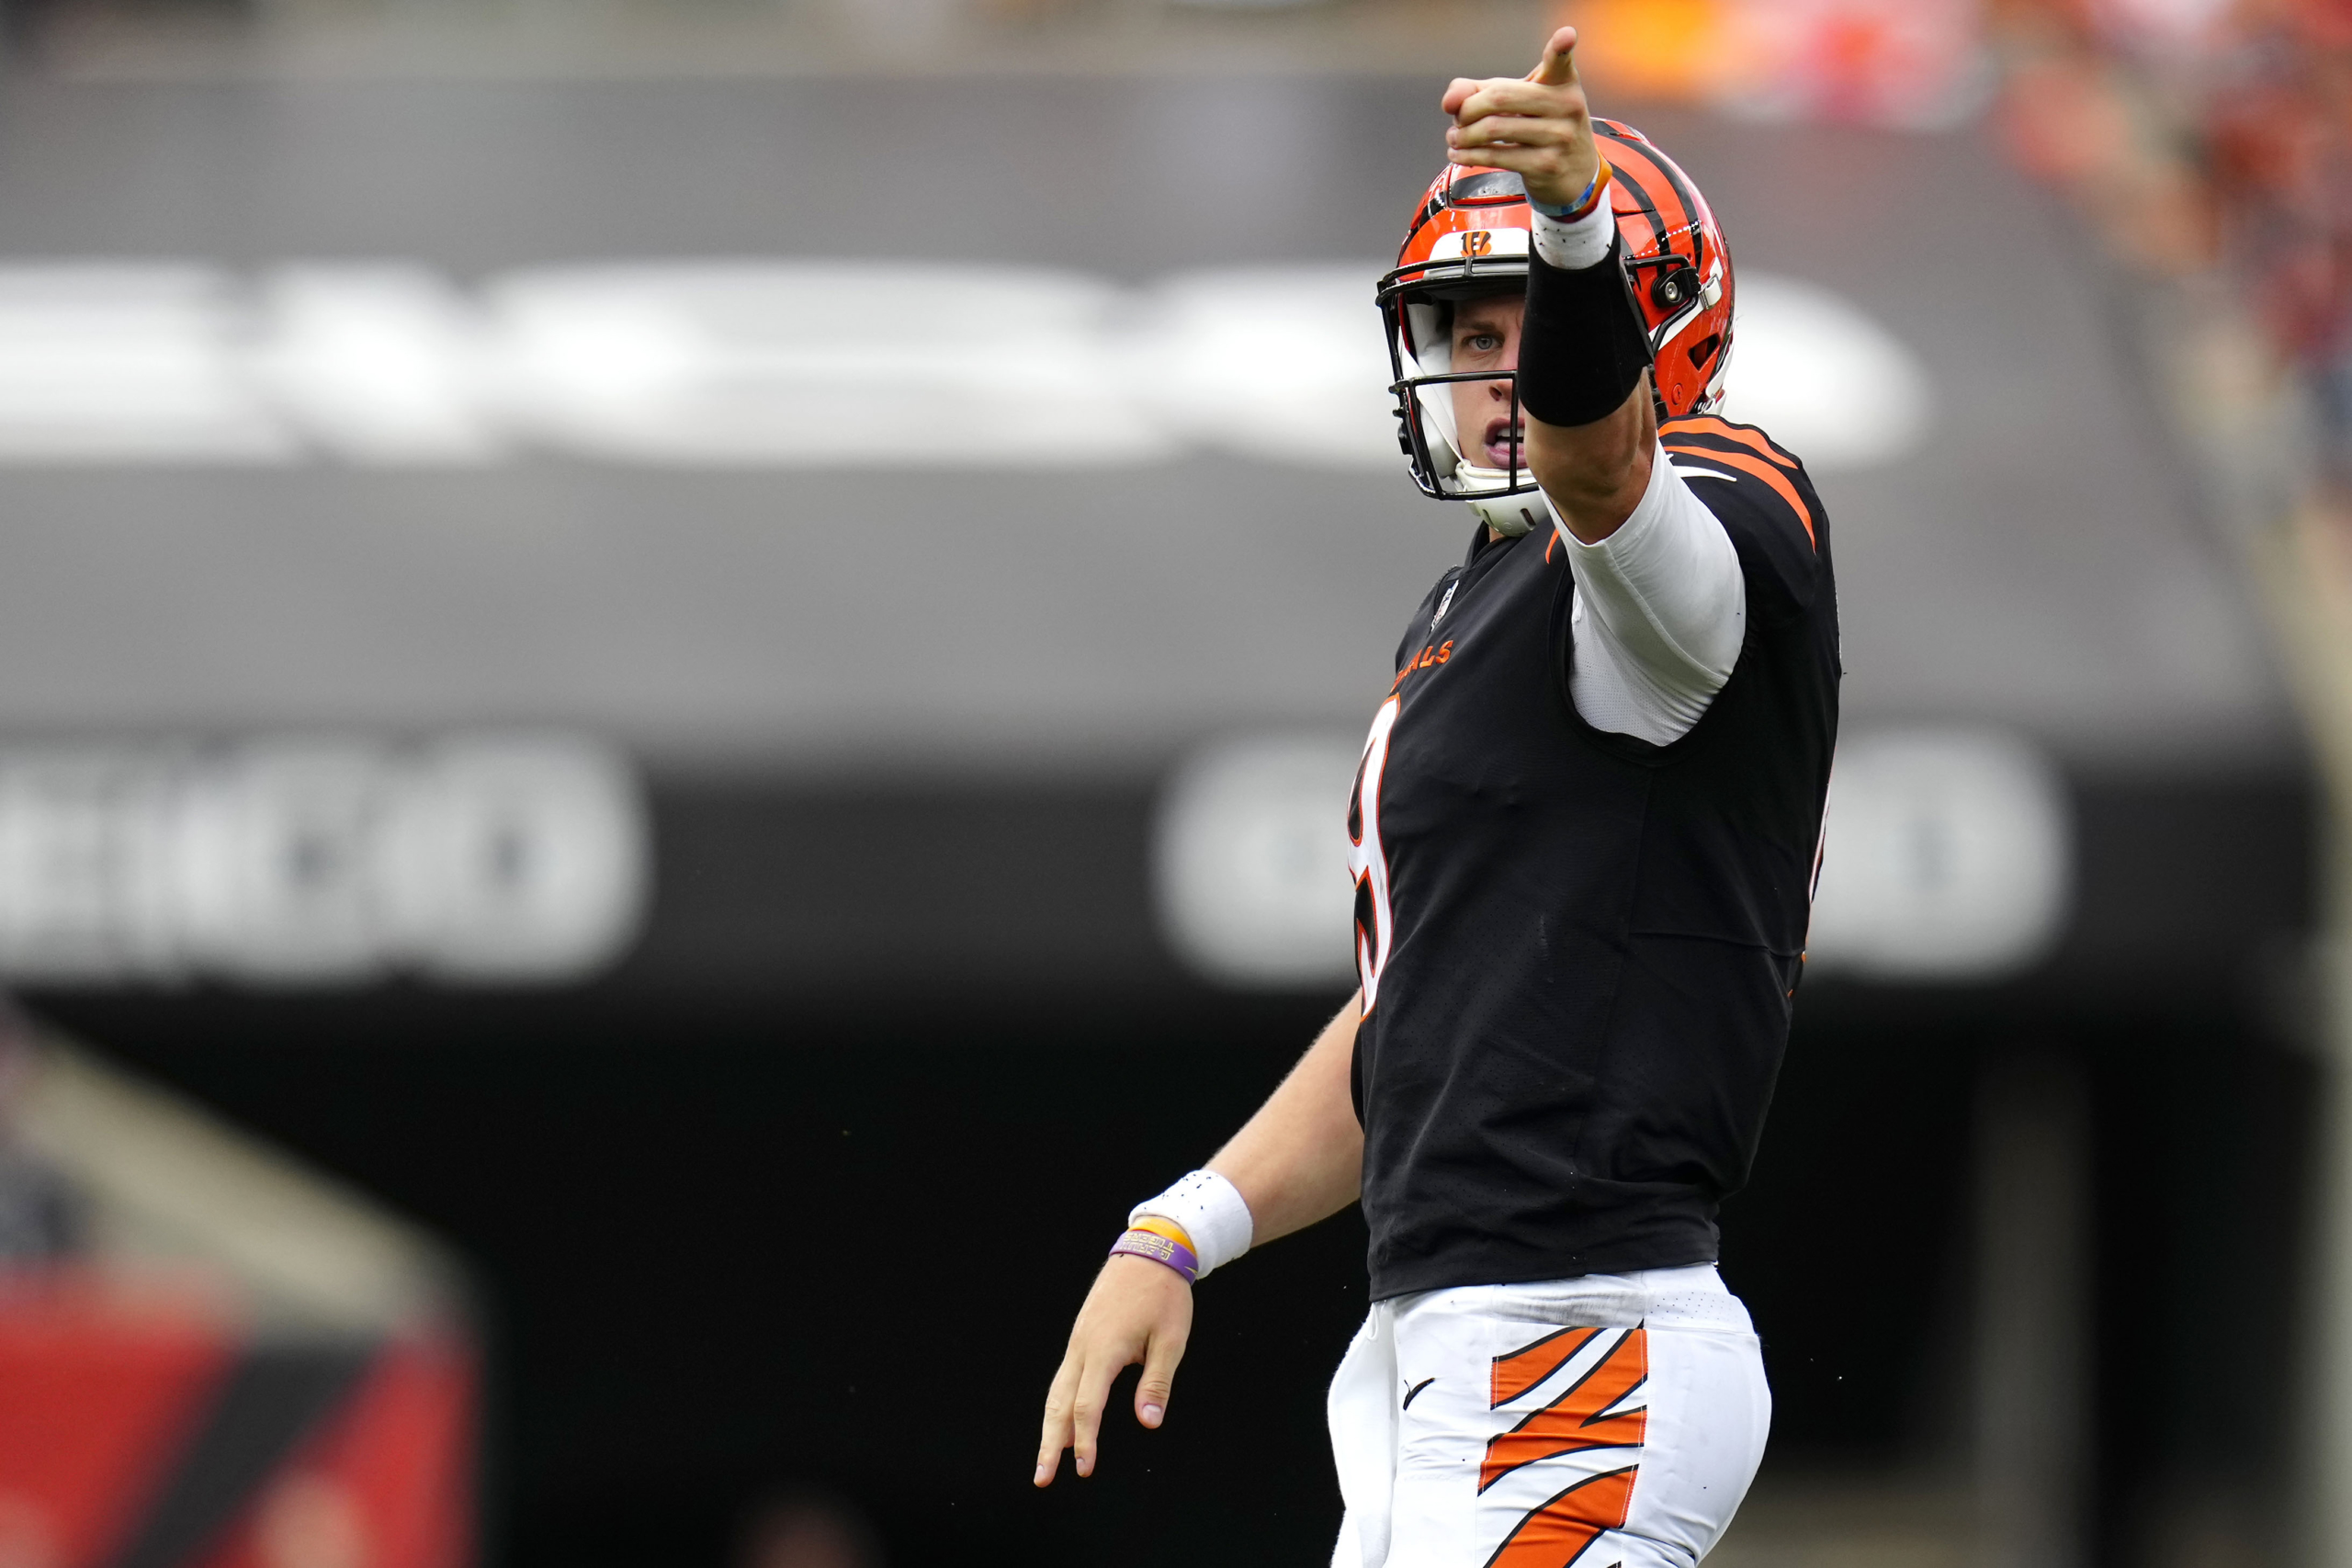 Bengals: Joe Burrow falls out of top 5 in weekly QB rankings